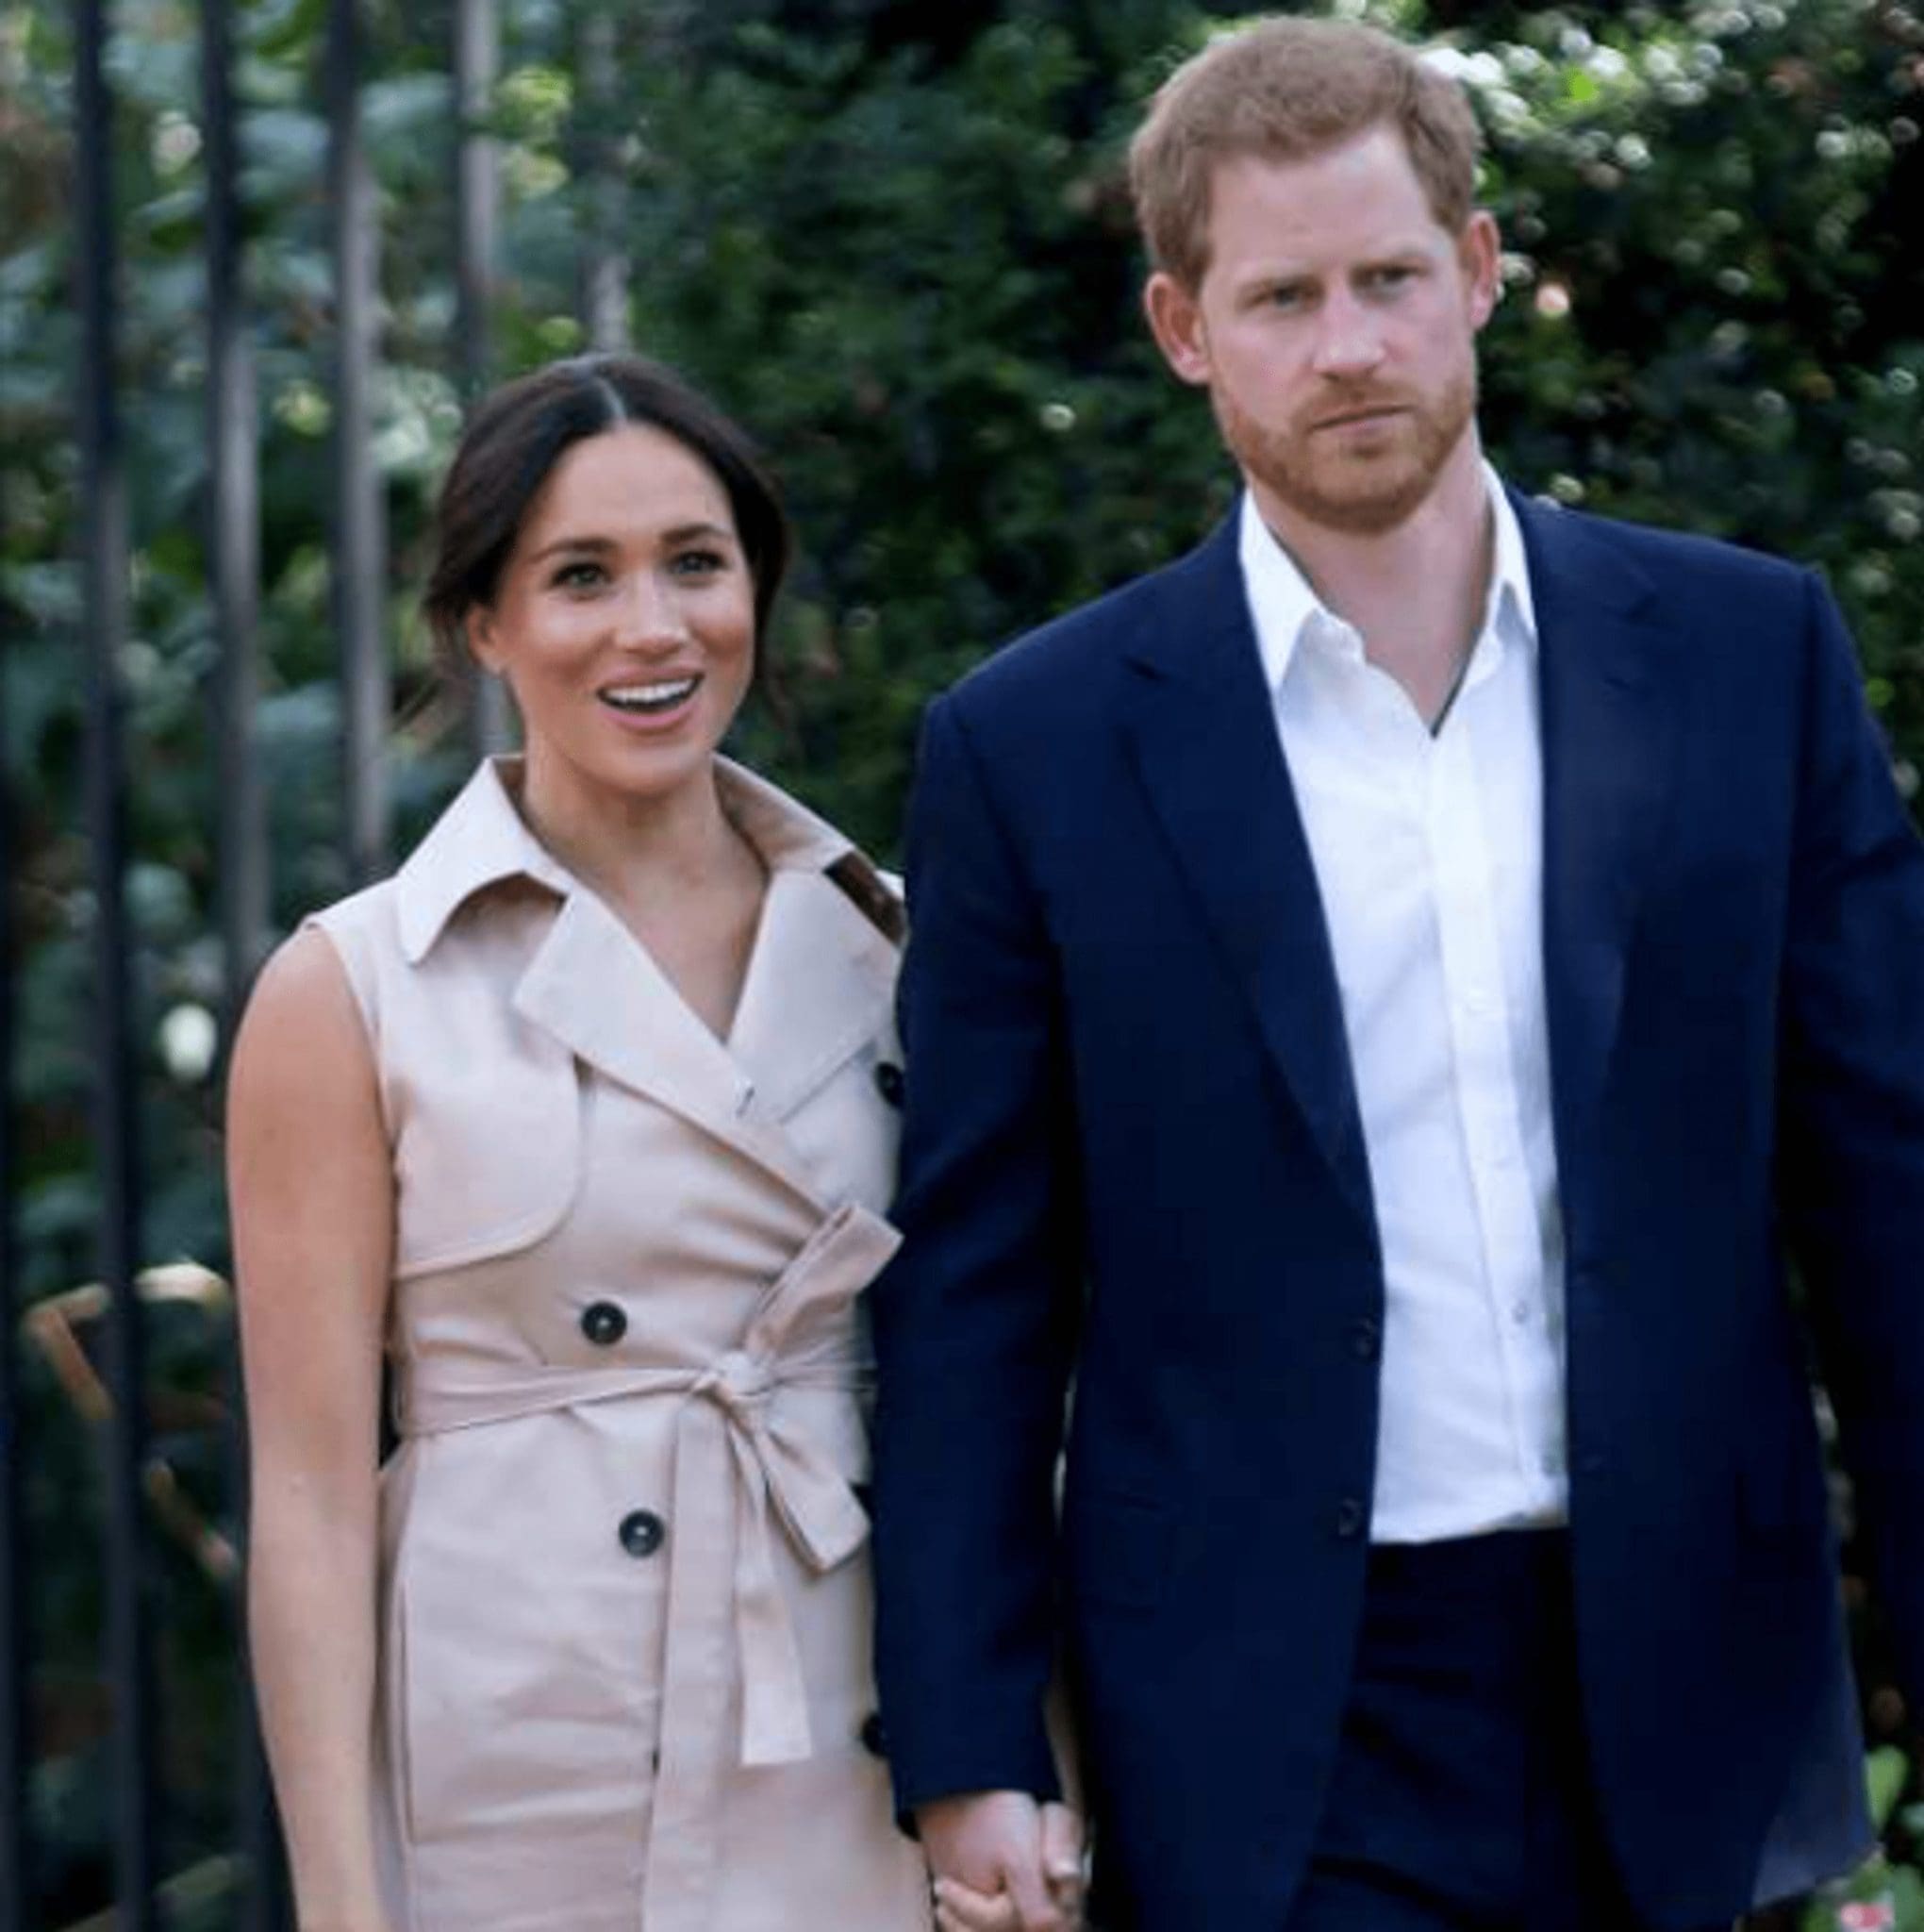 Prince Harry and Meghan Markle may be excluded from the royal family due to their behavior at the Platinum Jubilee